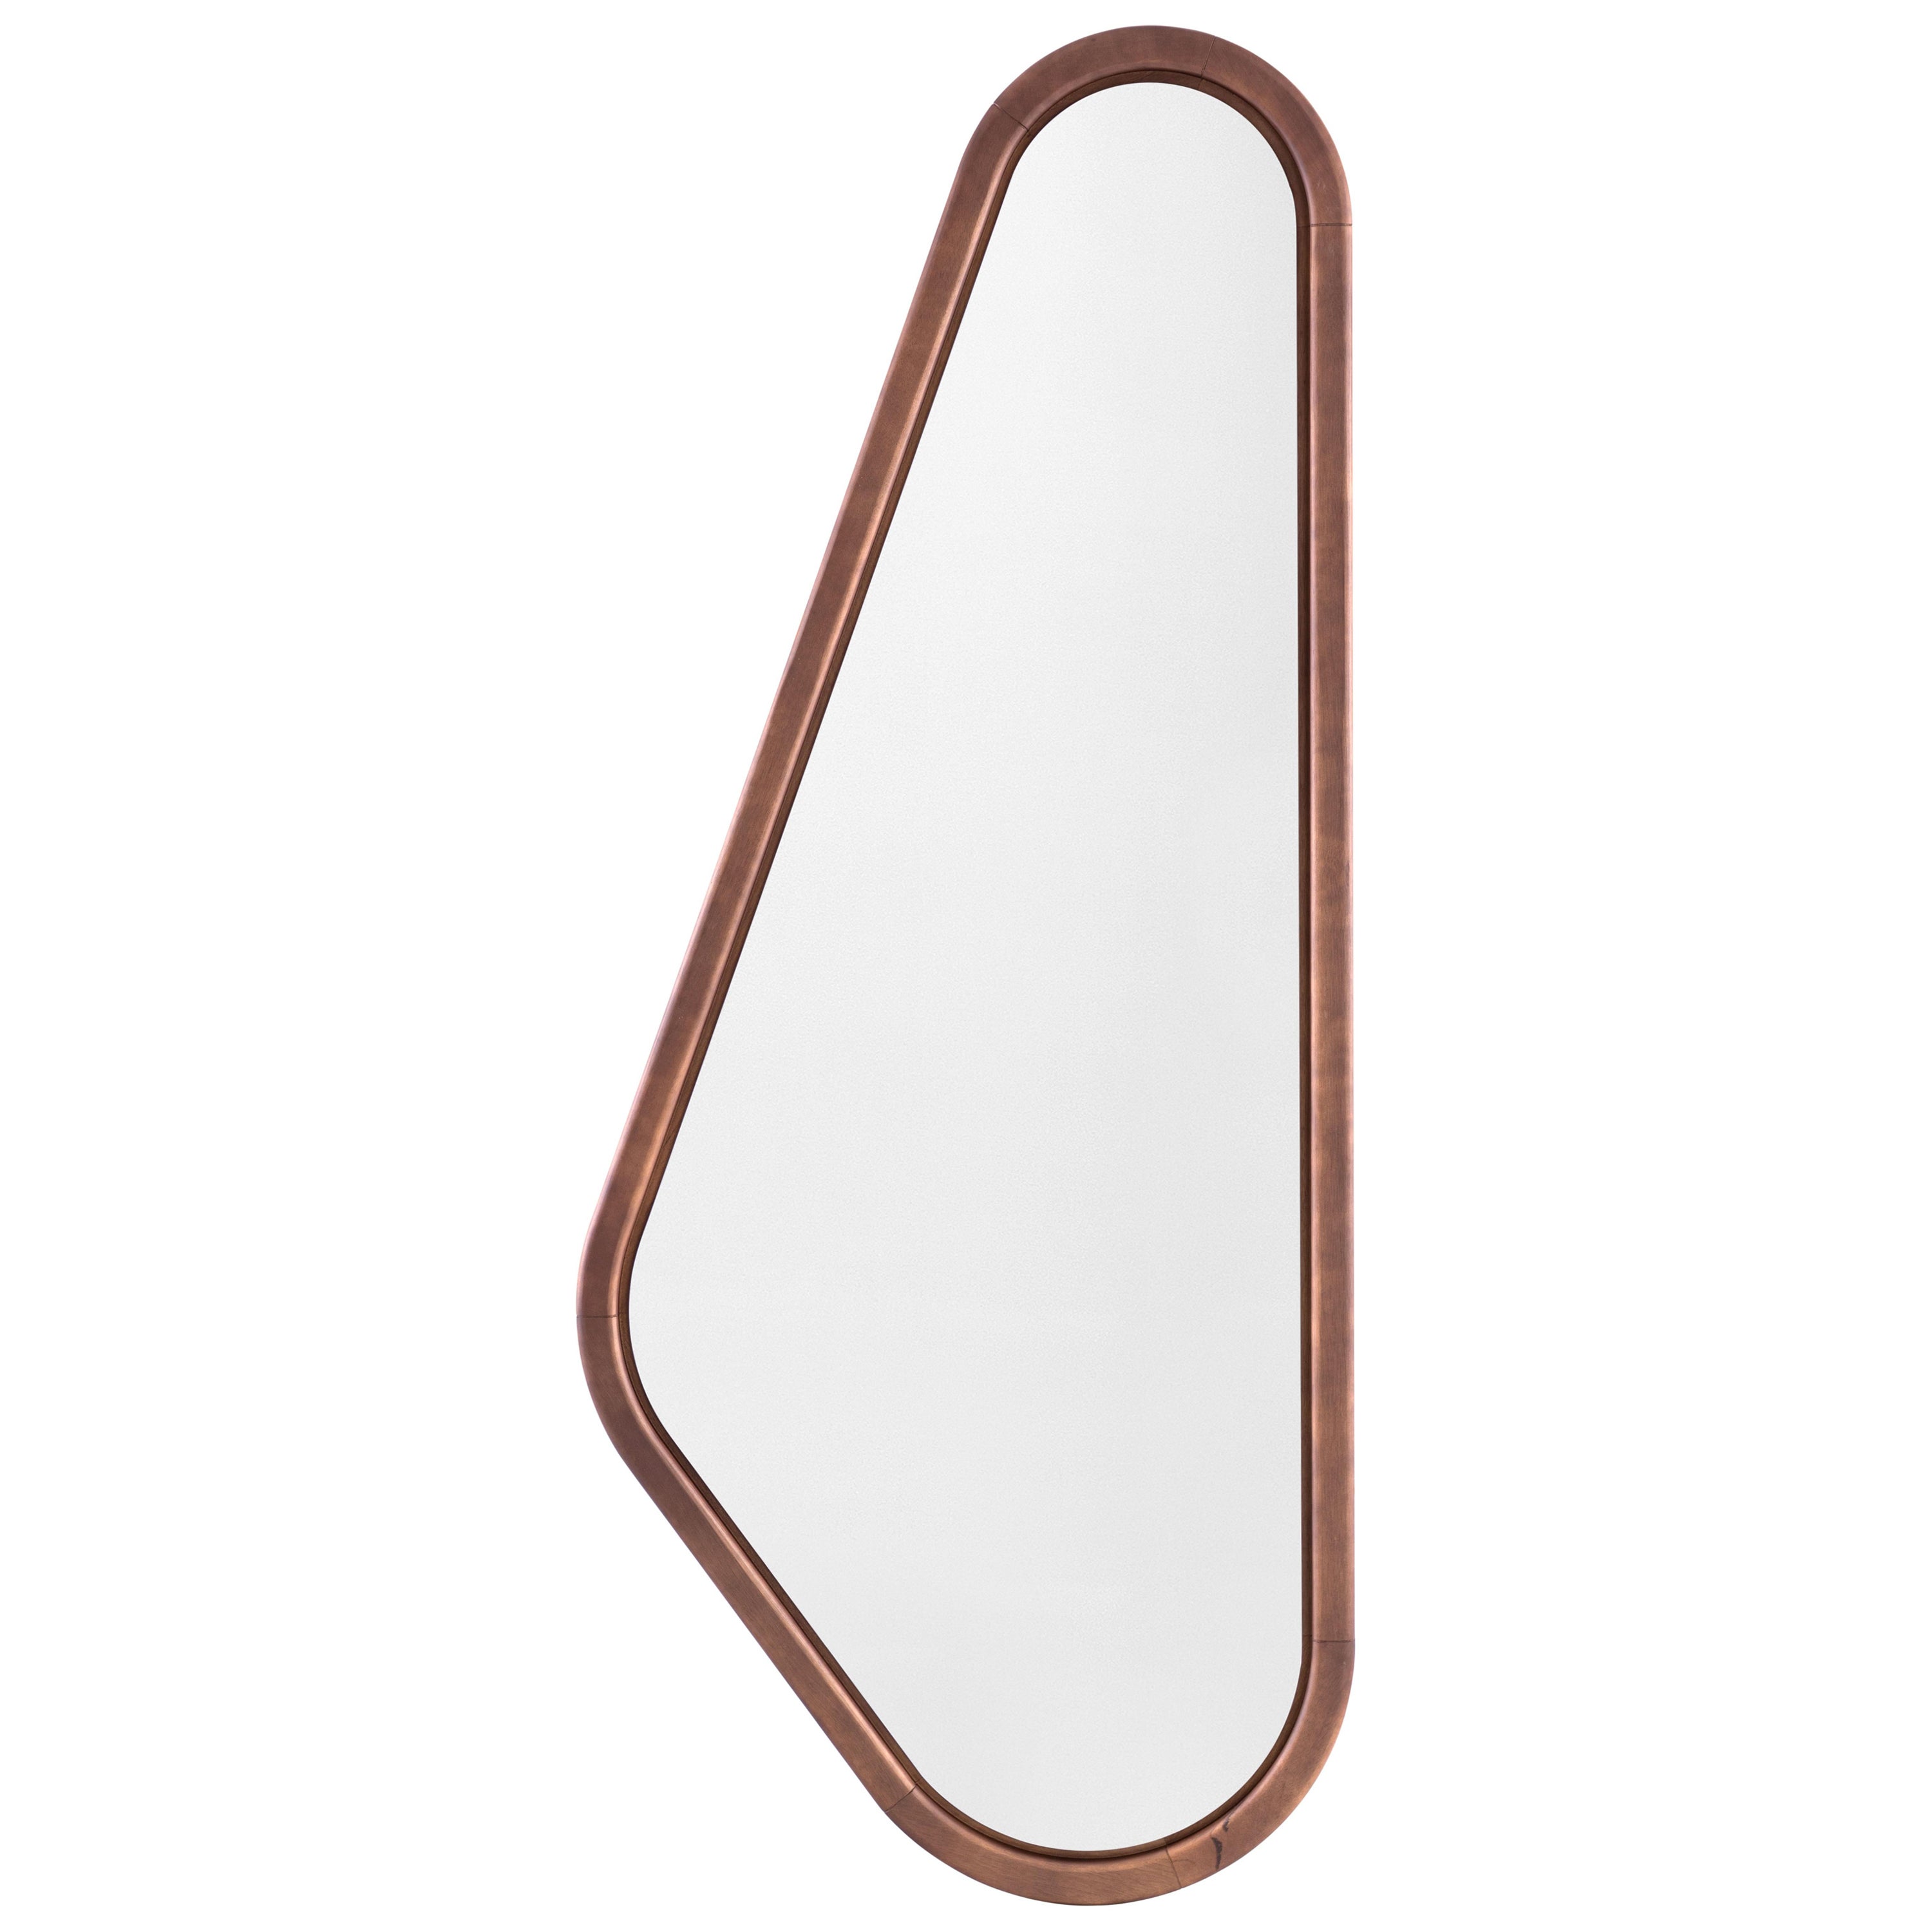 Ali Left Mirror in Walnut Wood Finish Frame Individual For Sale